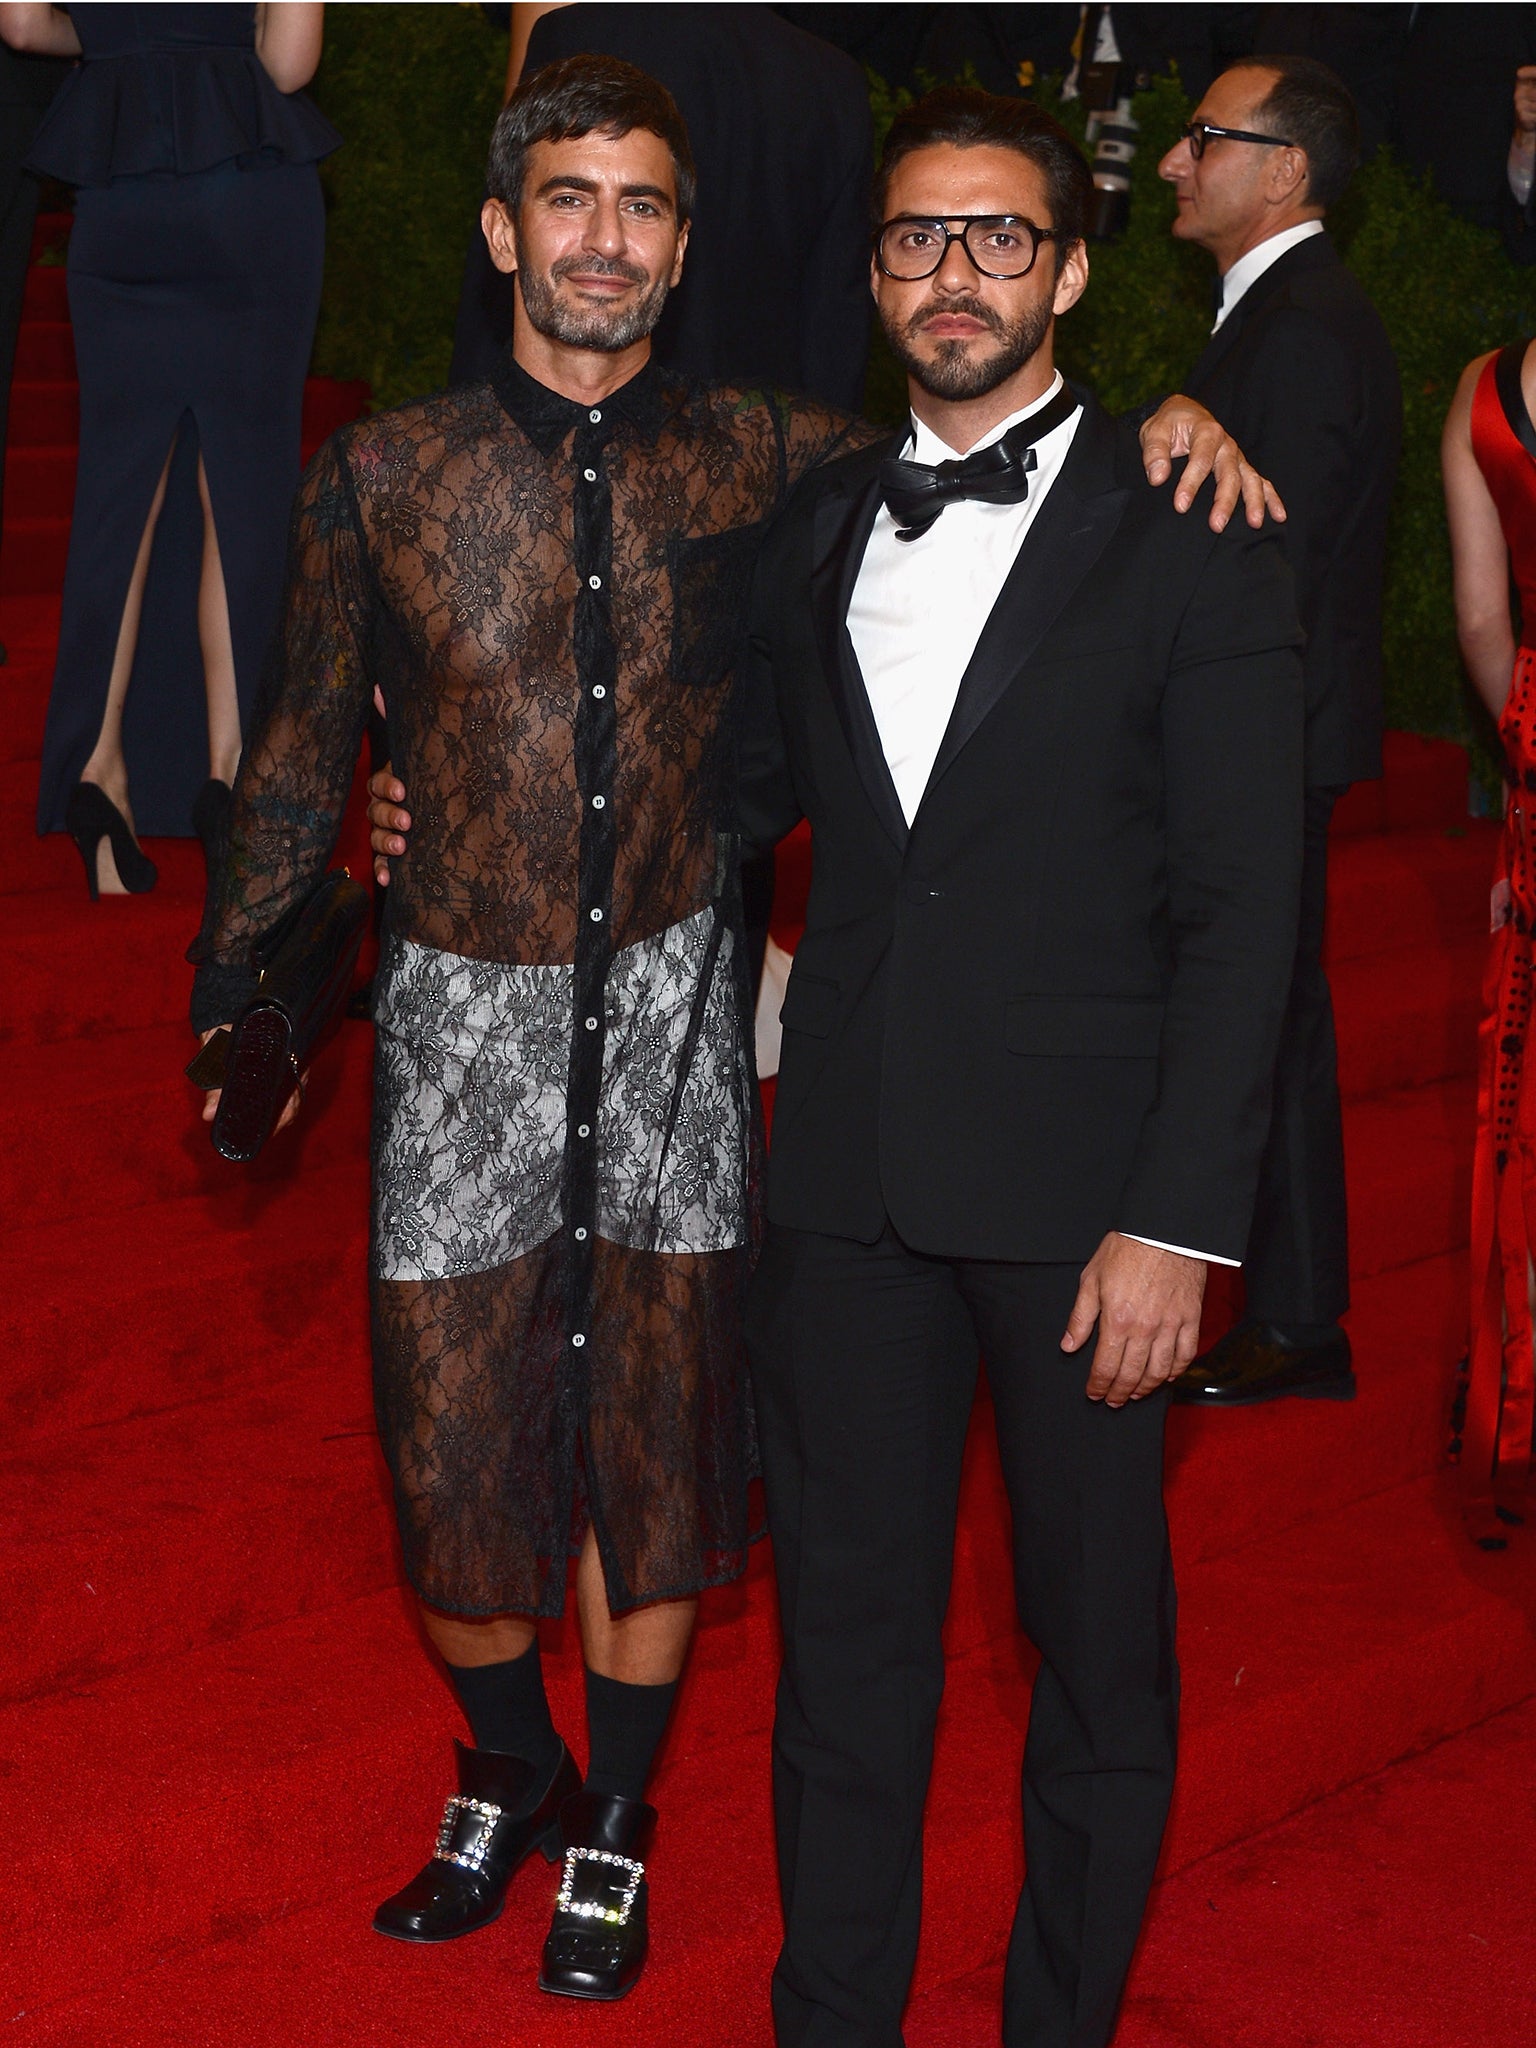 Marc Jacobs in VPL and Comme des Garçons at the Met Gala 2012